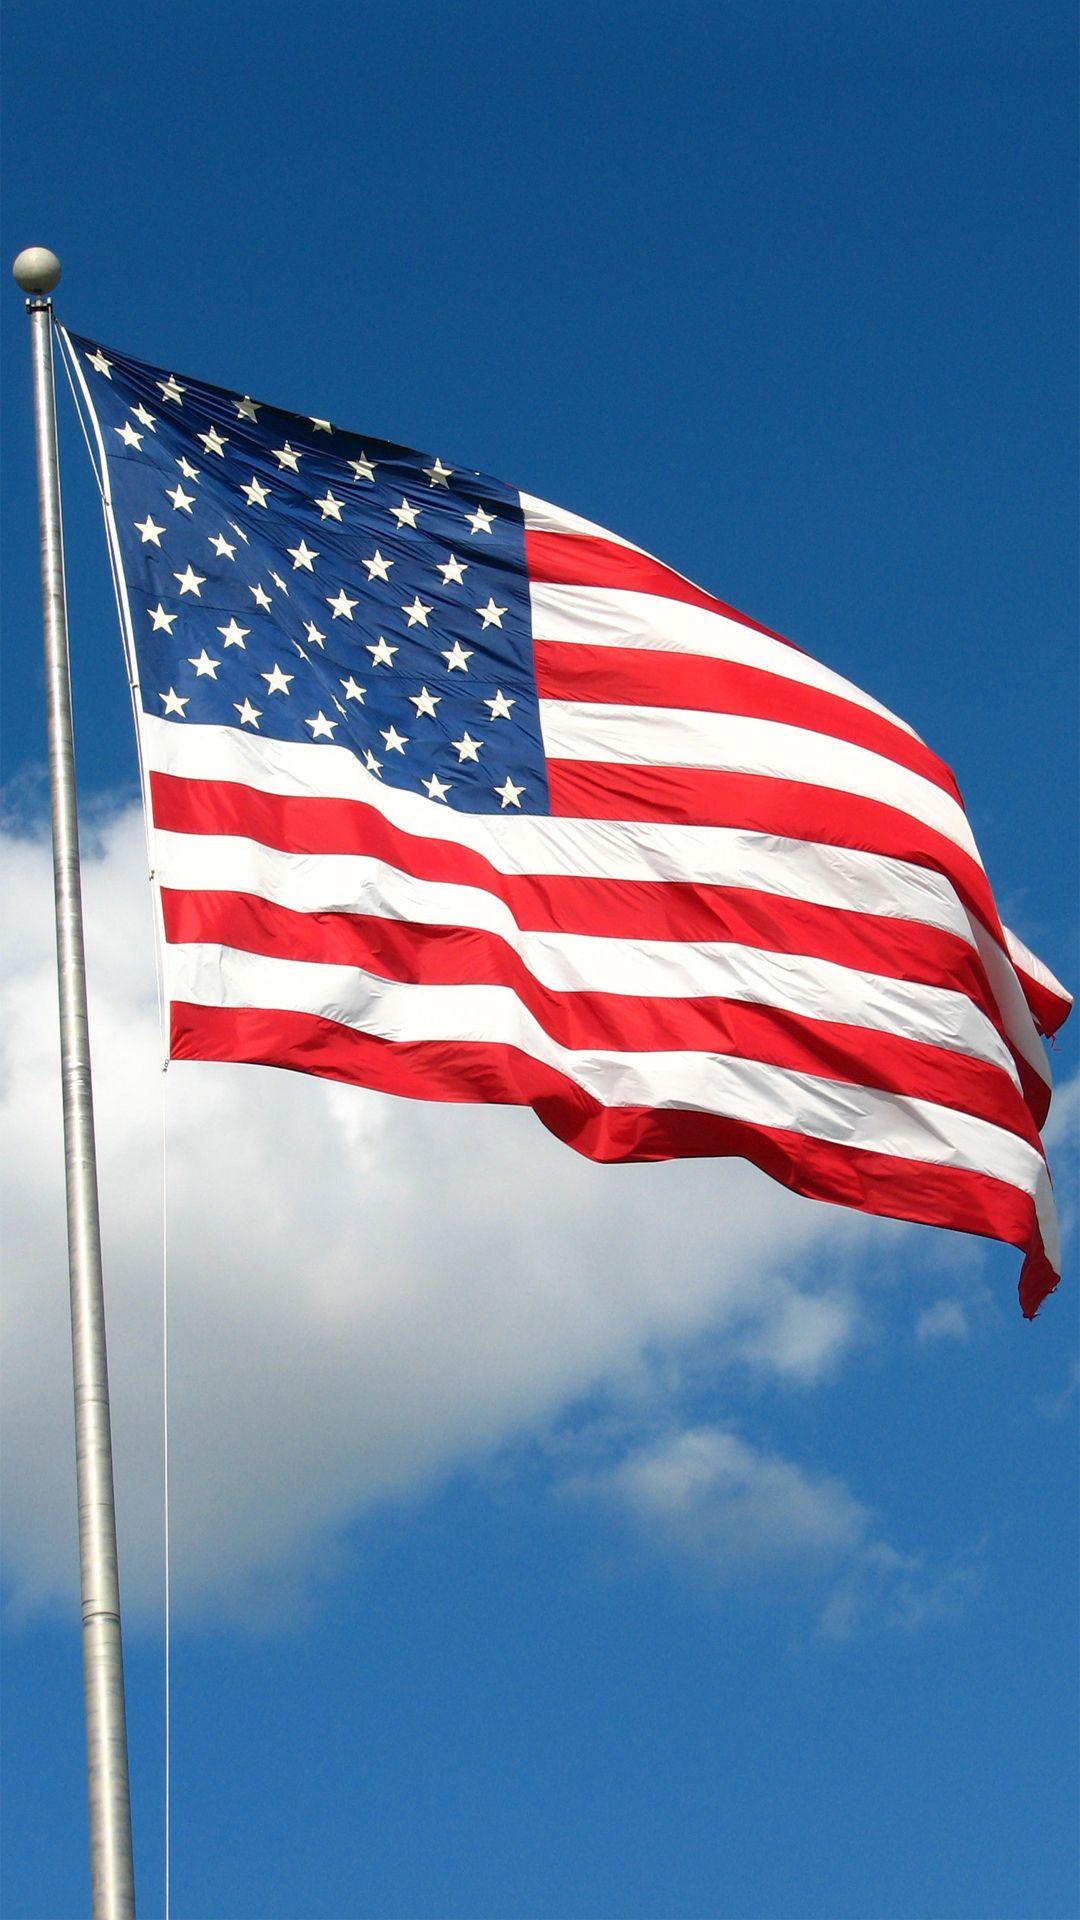 American Flag htc one wallpaper htc one wallpaper, free